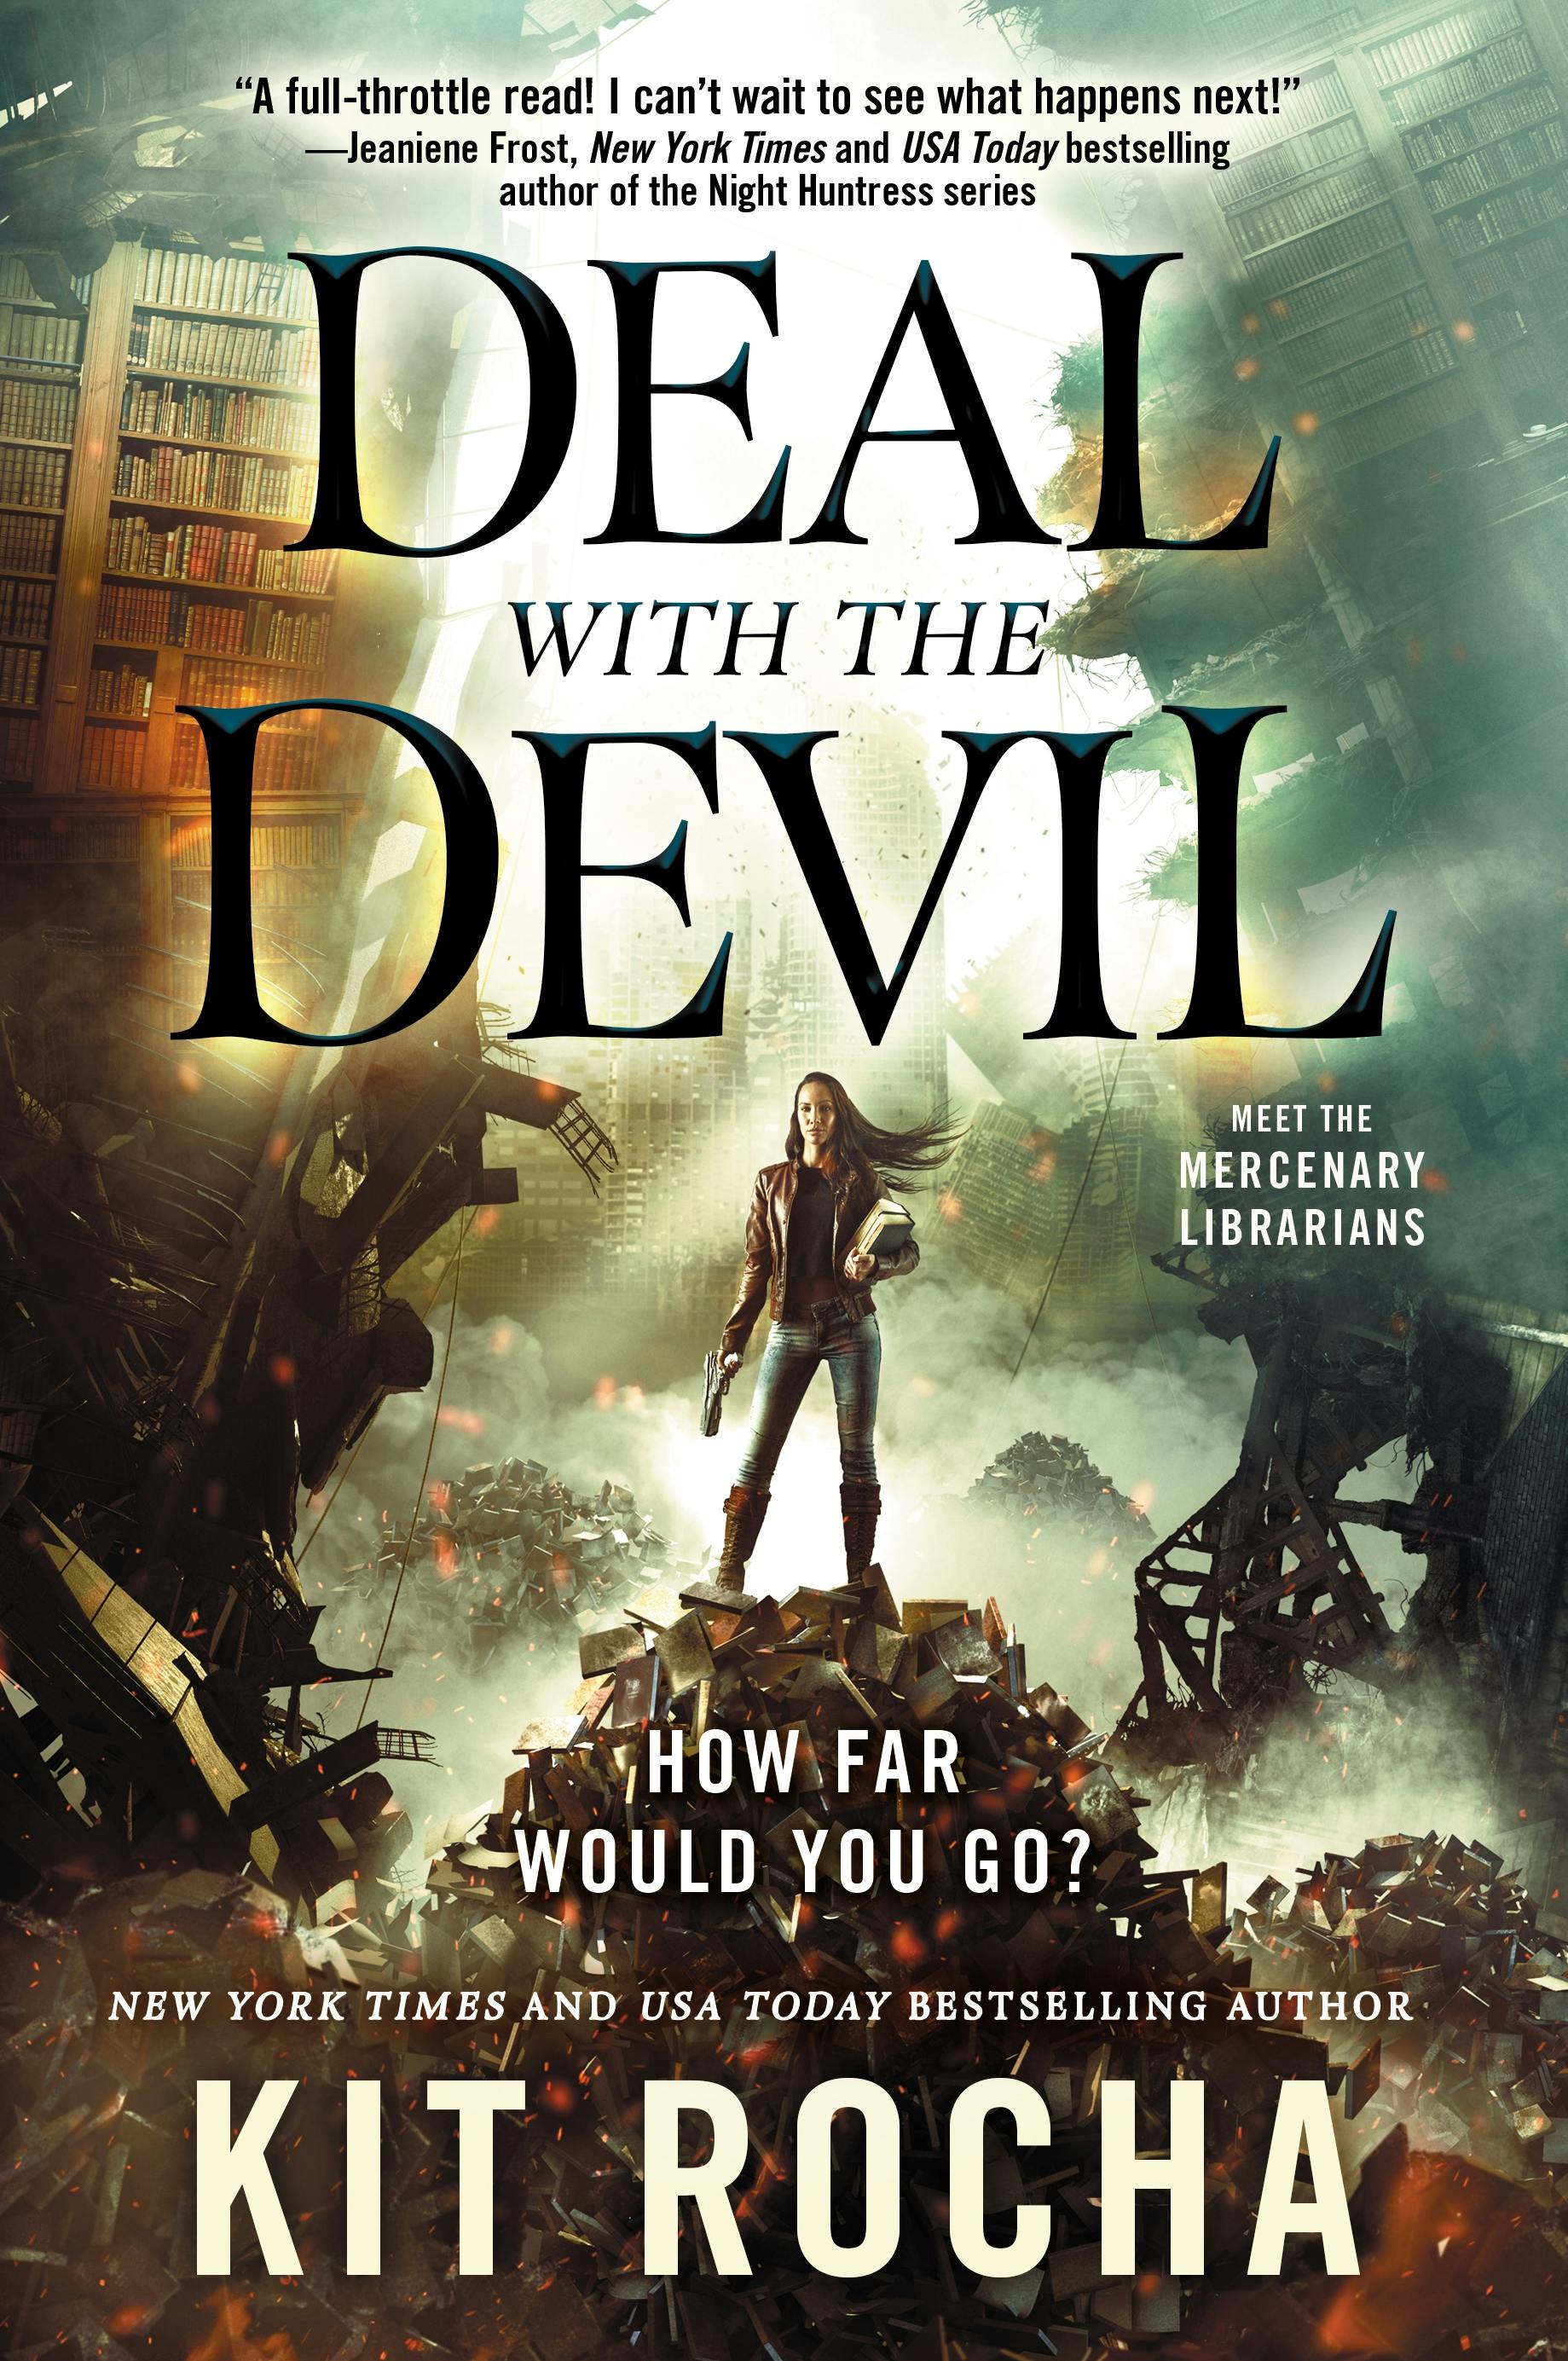 Cover for the book titled as: Deal with the Devil